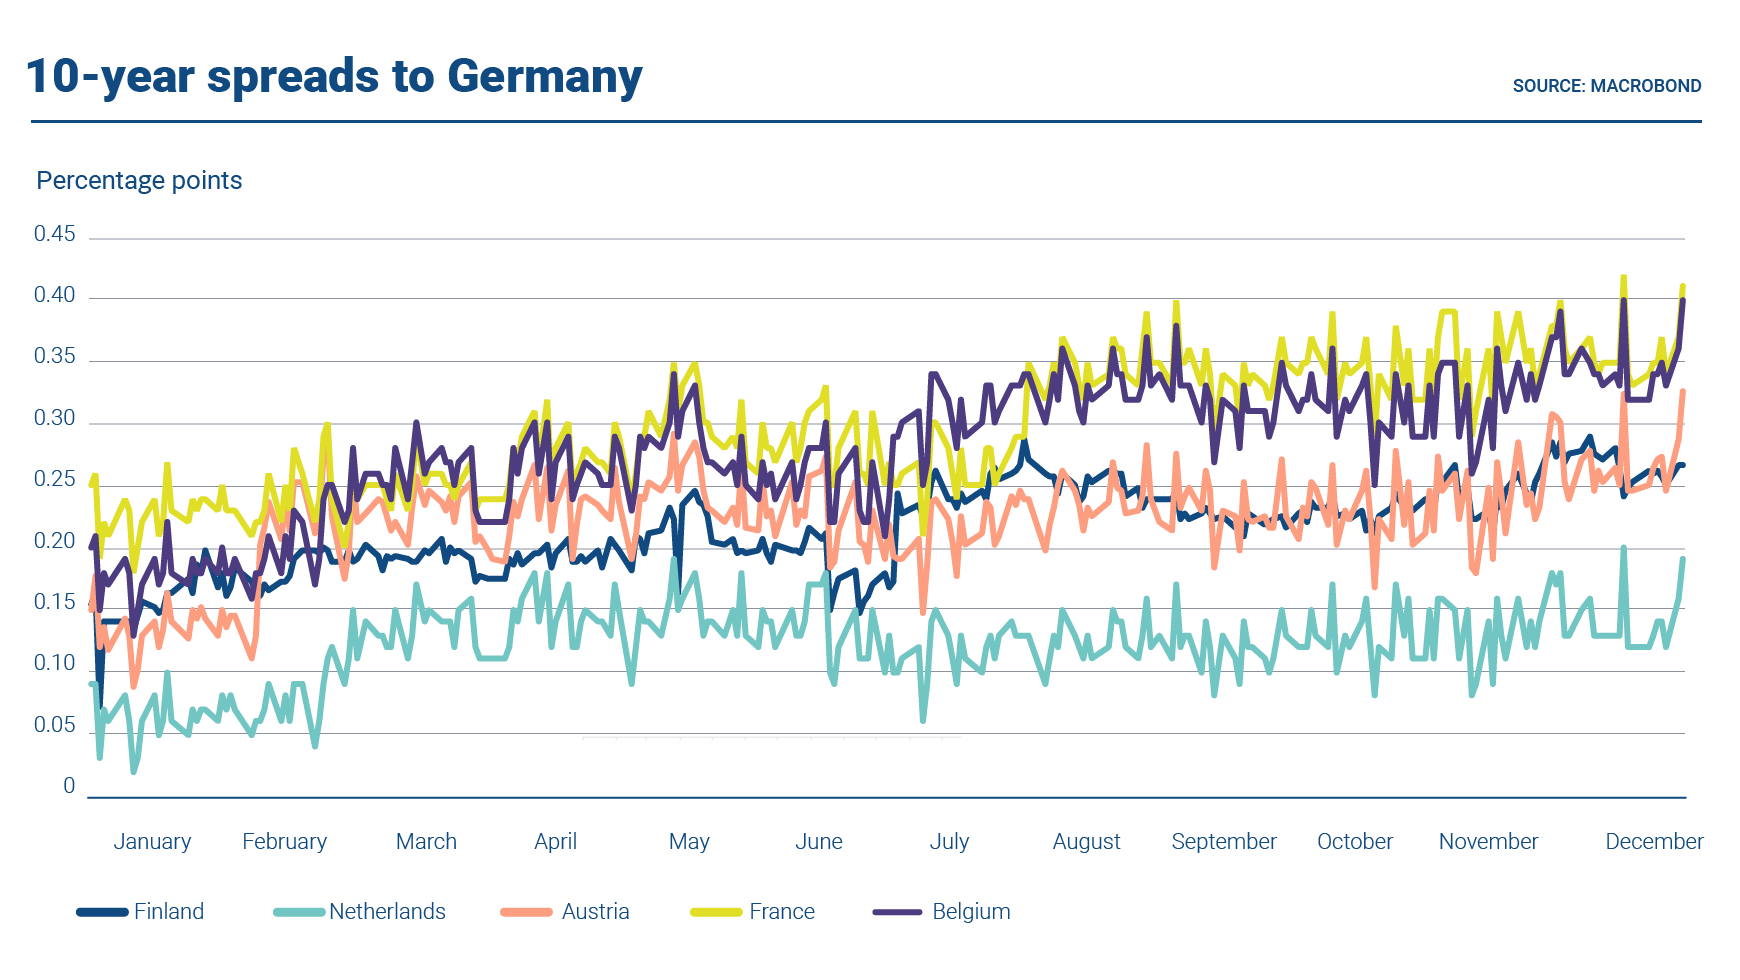 The graph shows the 10-year bond spreads of Finland, the Netherlands, Austria, France and Belgium against Germany.